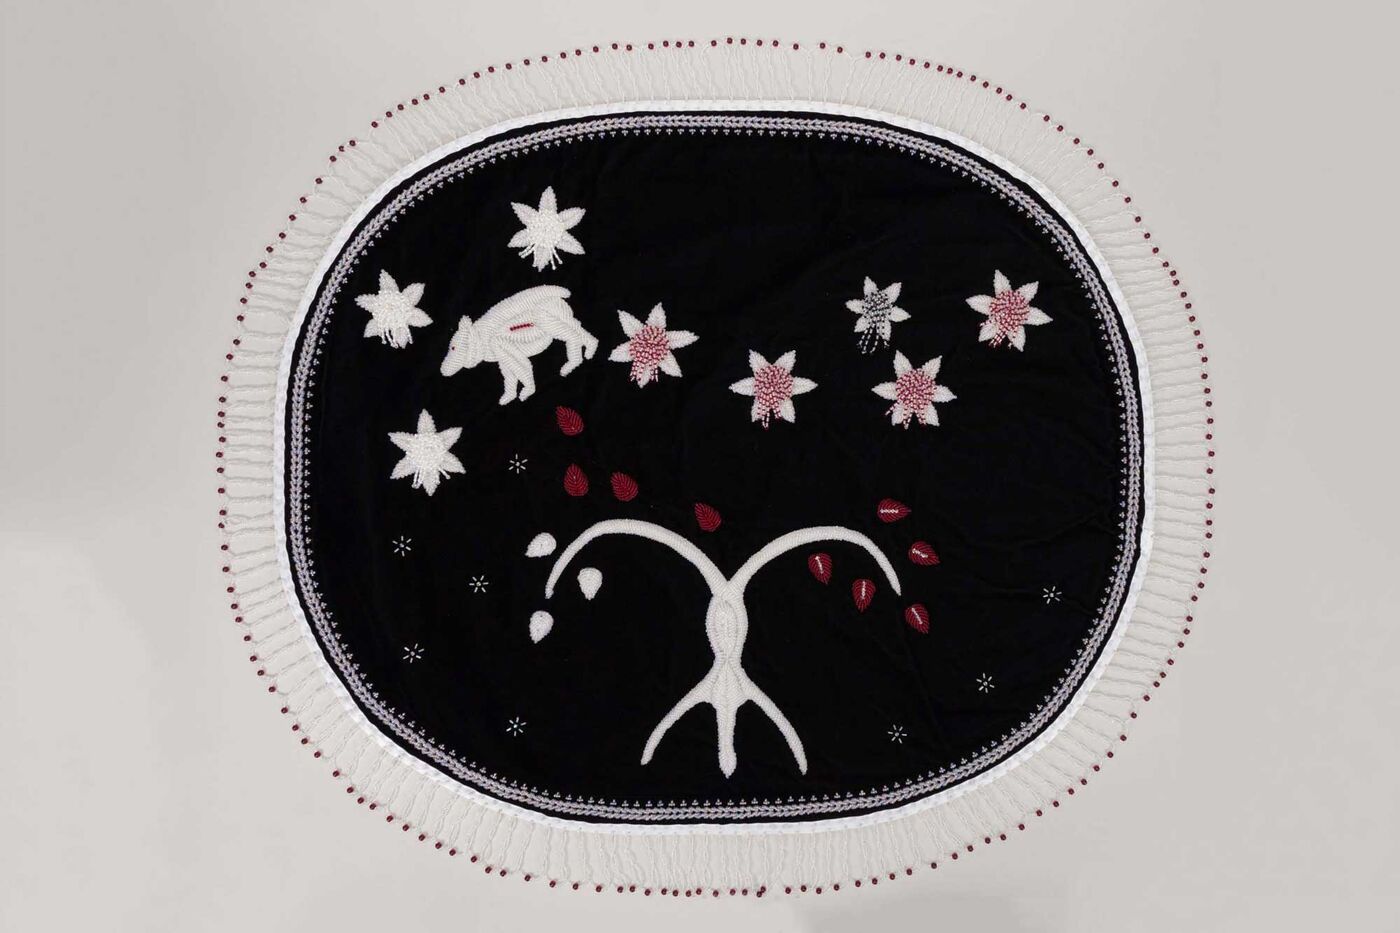 An oval-shaped embroidered artwork with images of a bear and flowers.